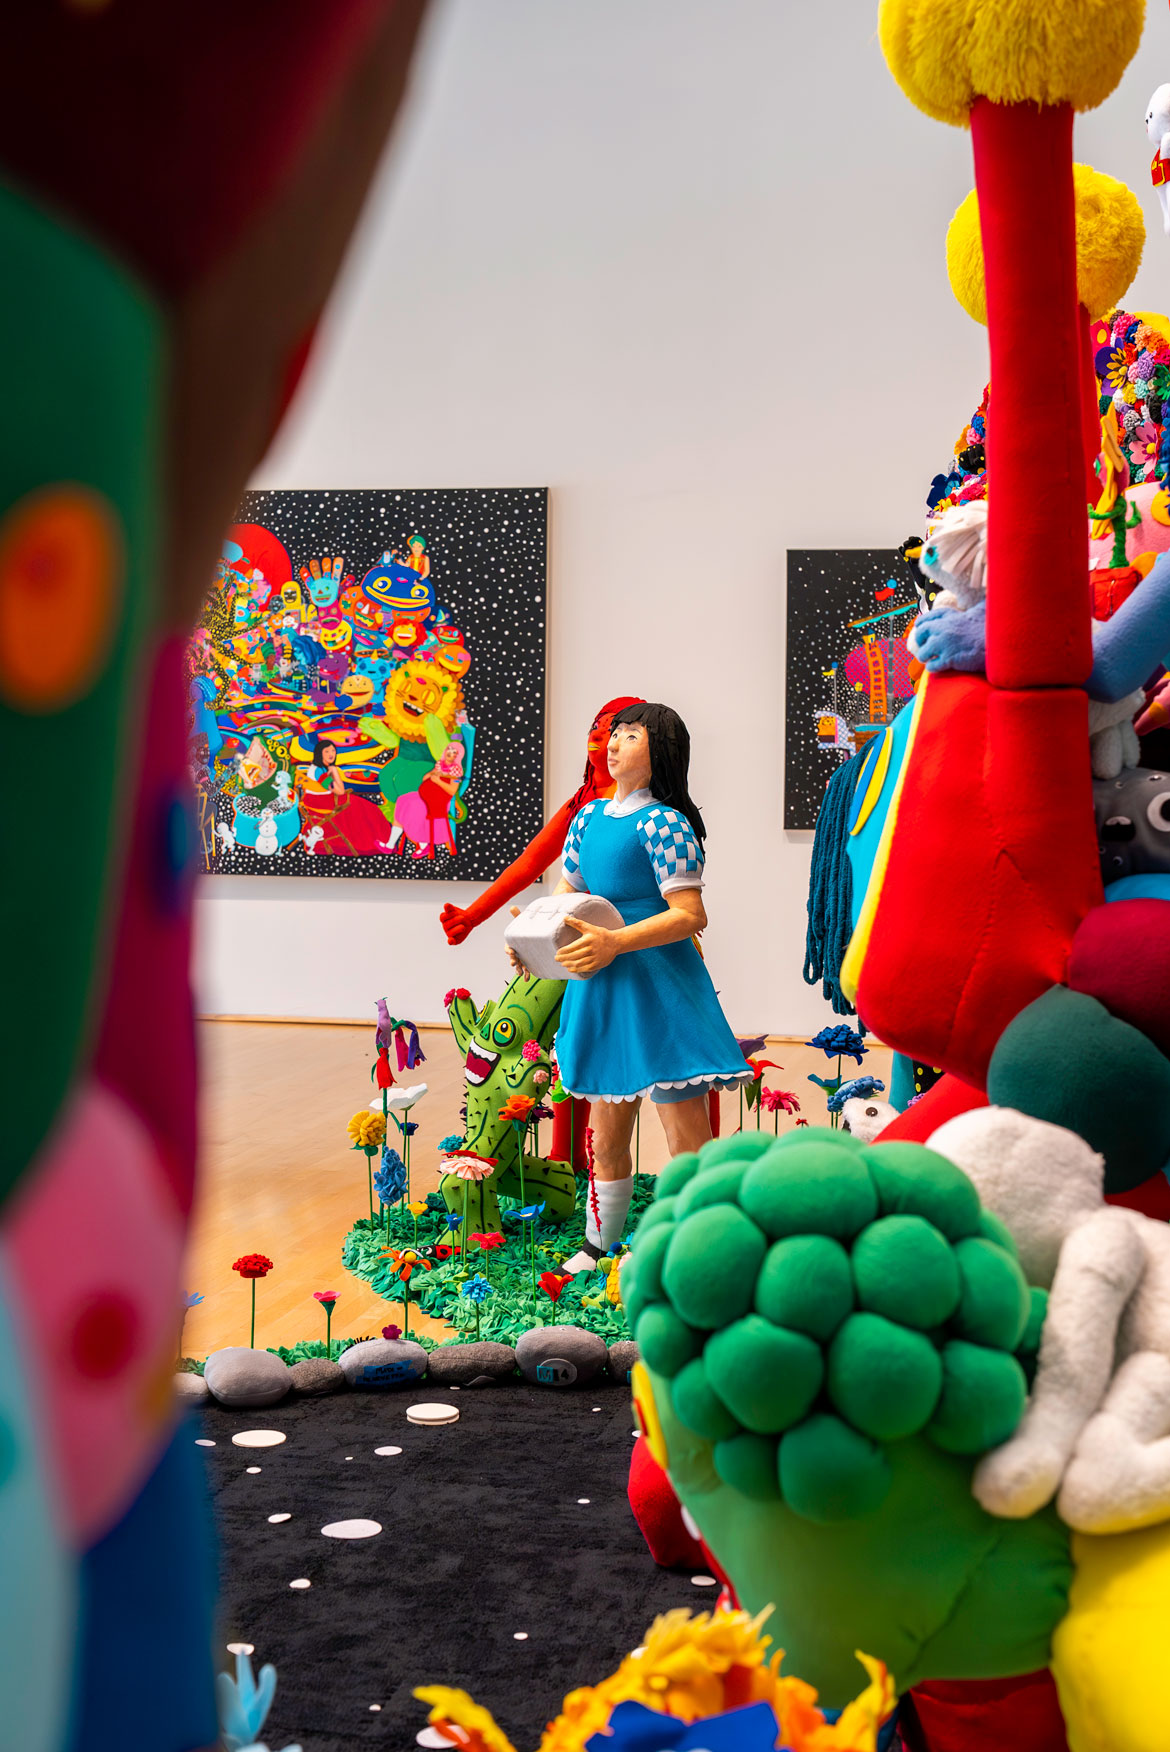 JooYoung Choi, “Like a Bolt Out of the Blue, Faith Steps In and Sees You Through—Infinite Feels Arrangement,” detail, installation view, “JooYoung Choi: Love and Wondervision,” May 25 – August 26, 2023, Moody Center for the Arts at Rice University. Photo by Gustavo Raskosky.